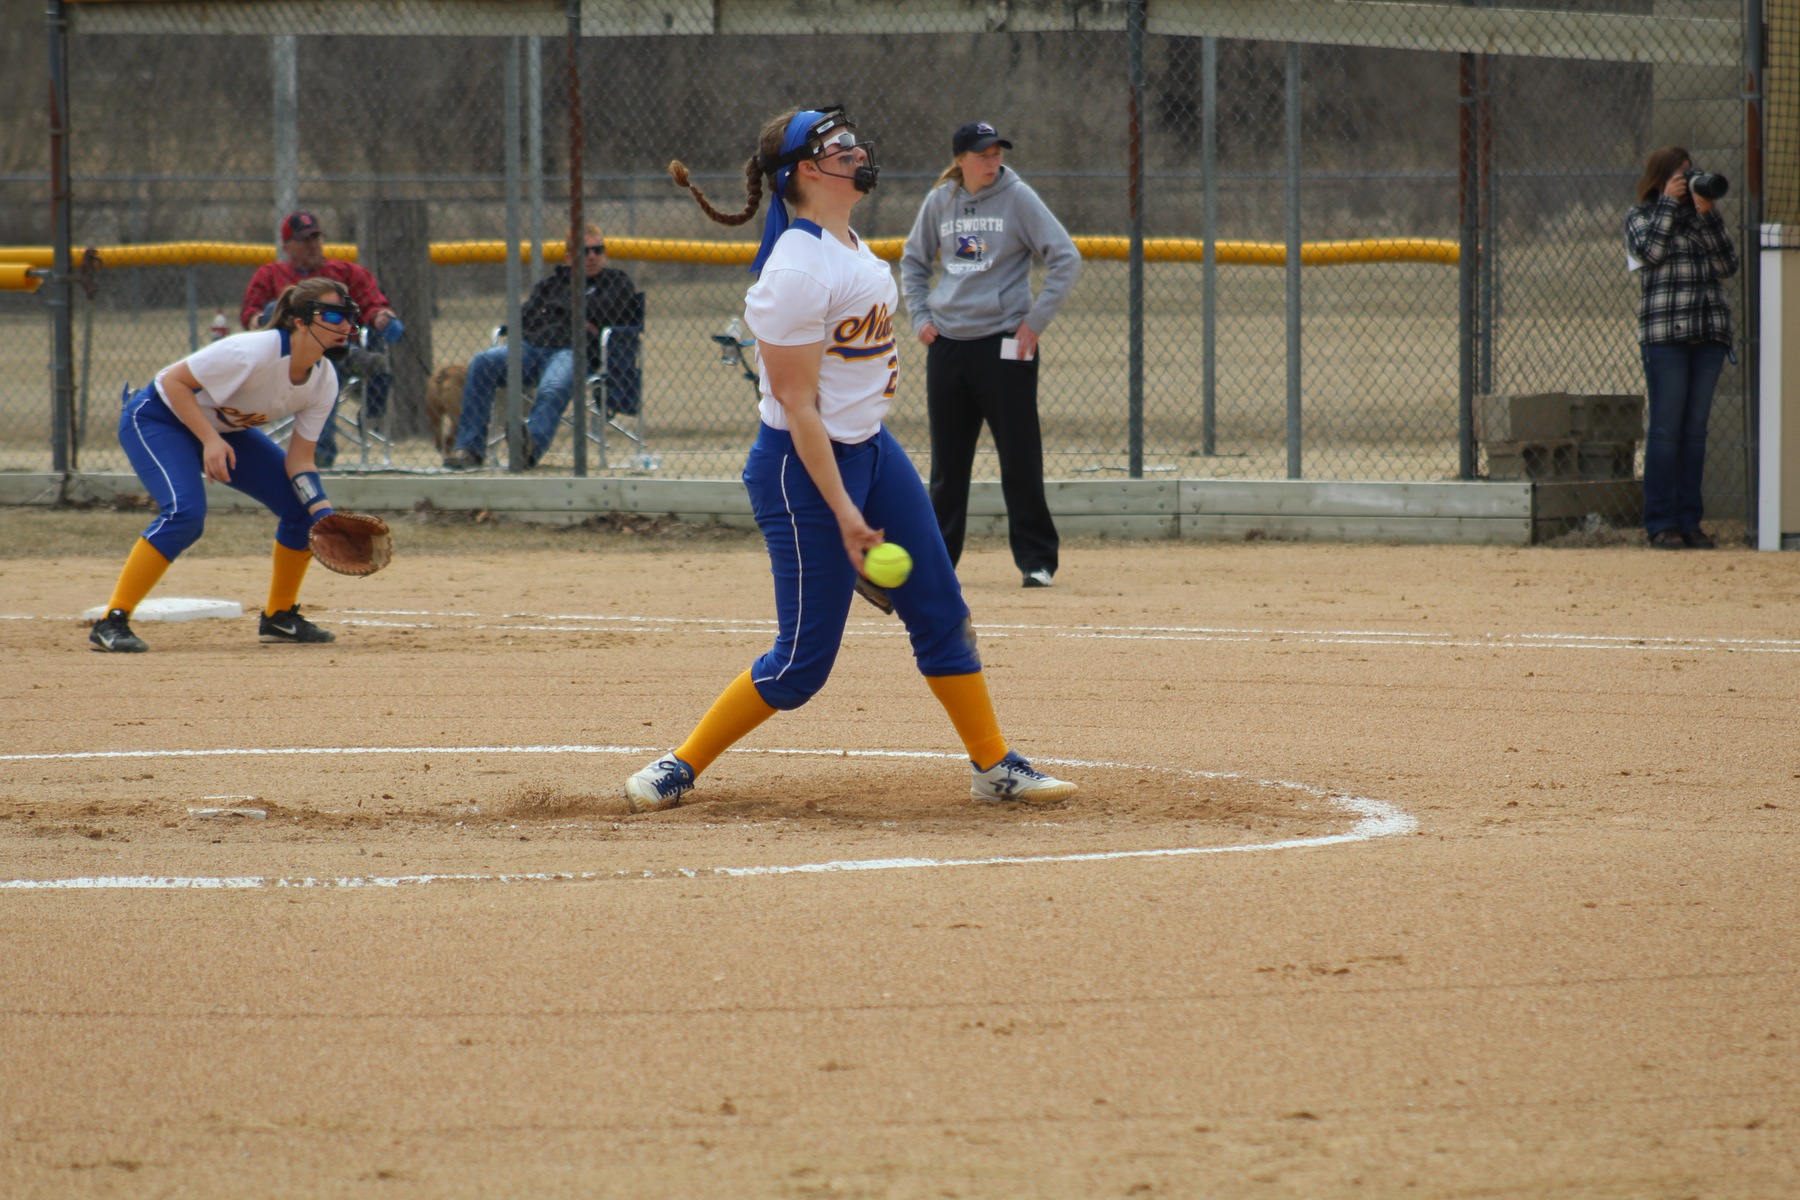 Alyssa Laxson delivers a pitch in first game of Thursday's twinbill.